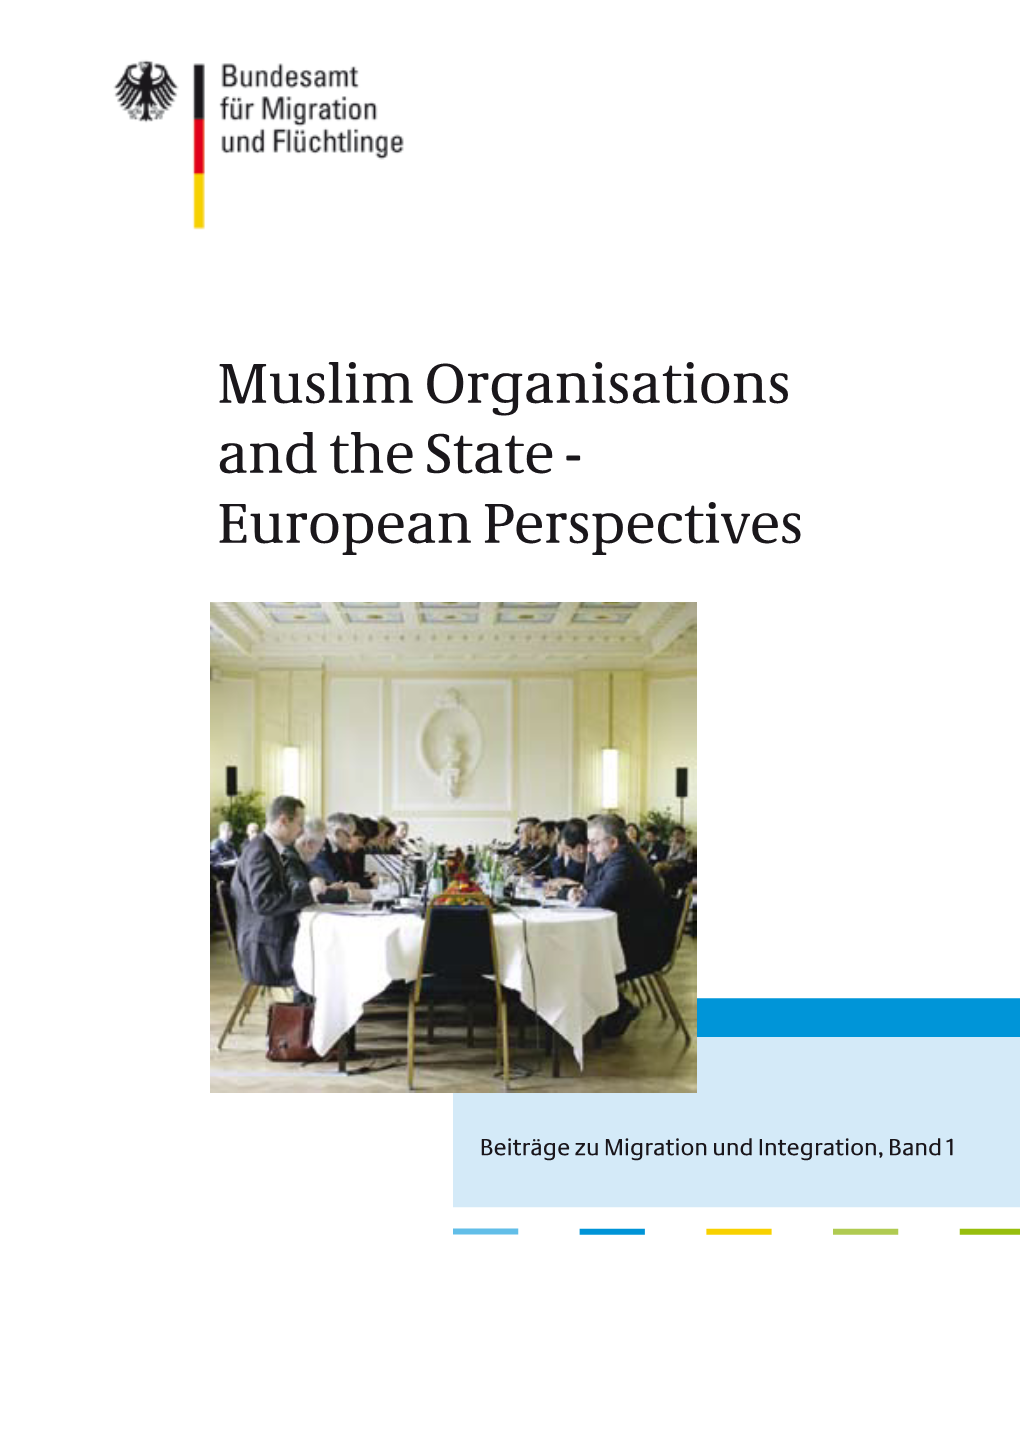 Muslim Organisations and the State - European Perspectives